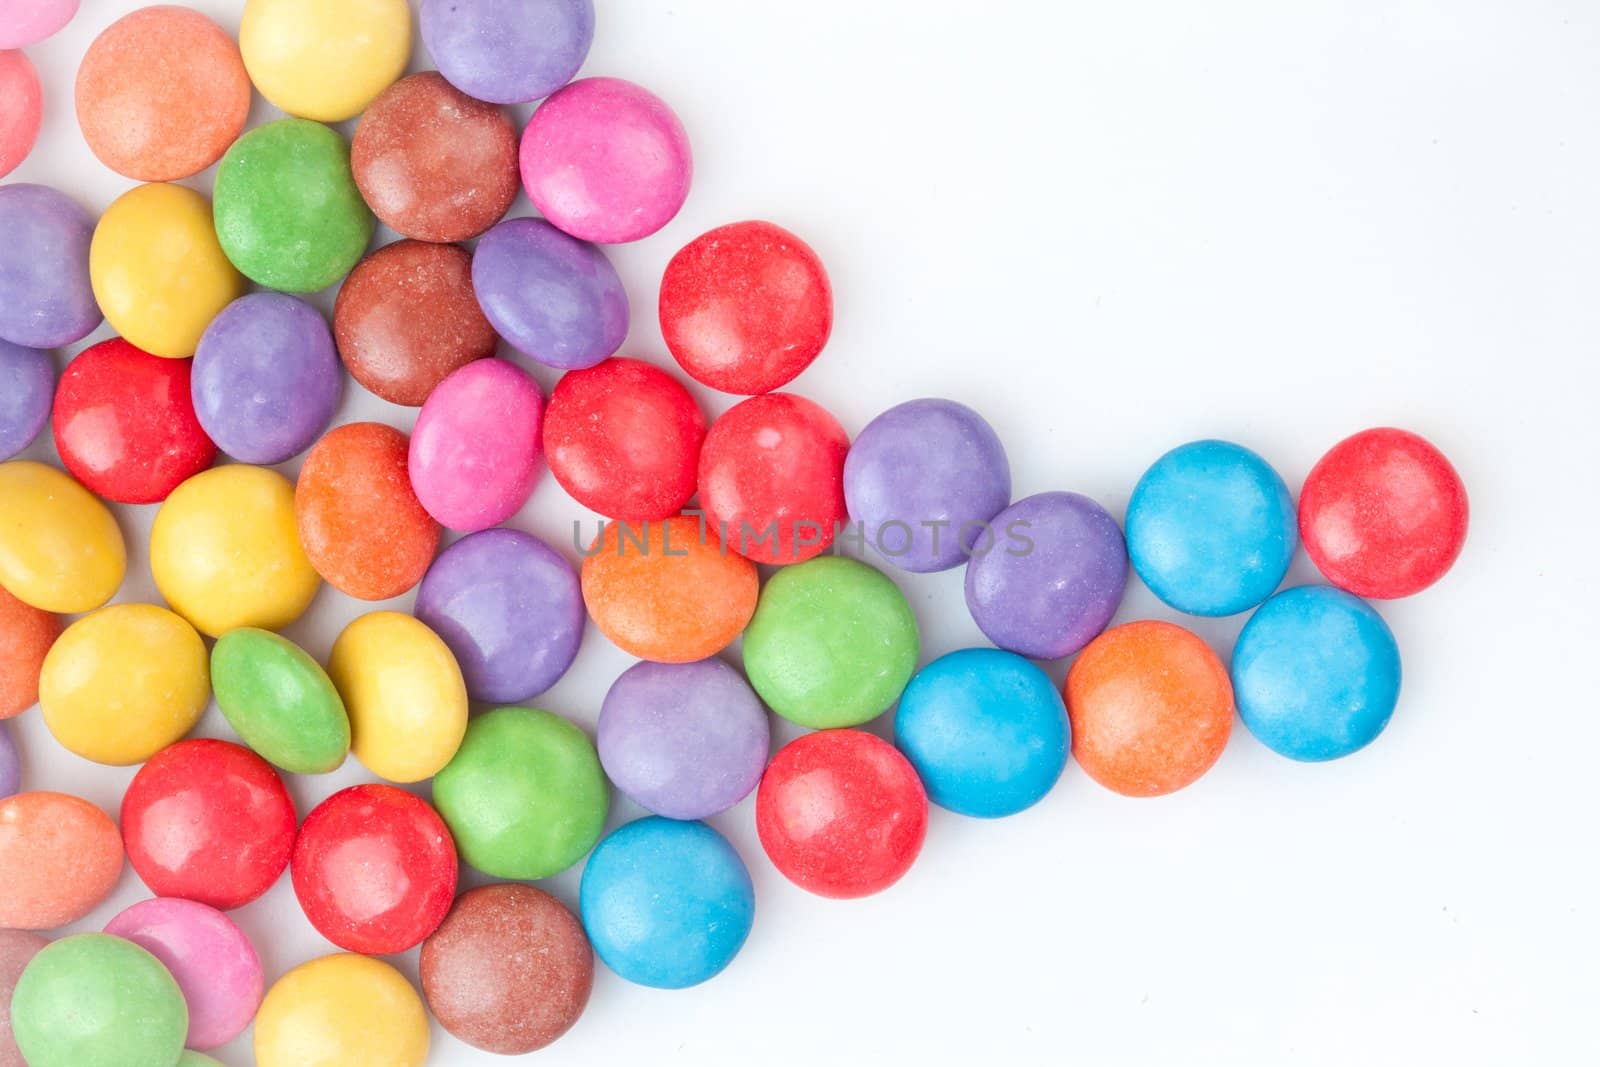 Multicolored candies against a white background